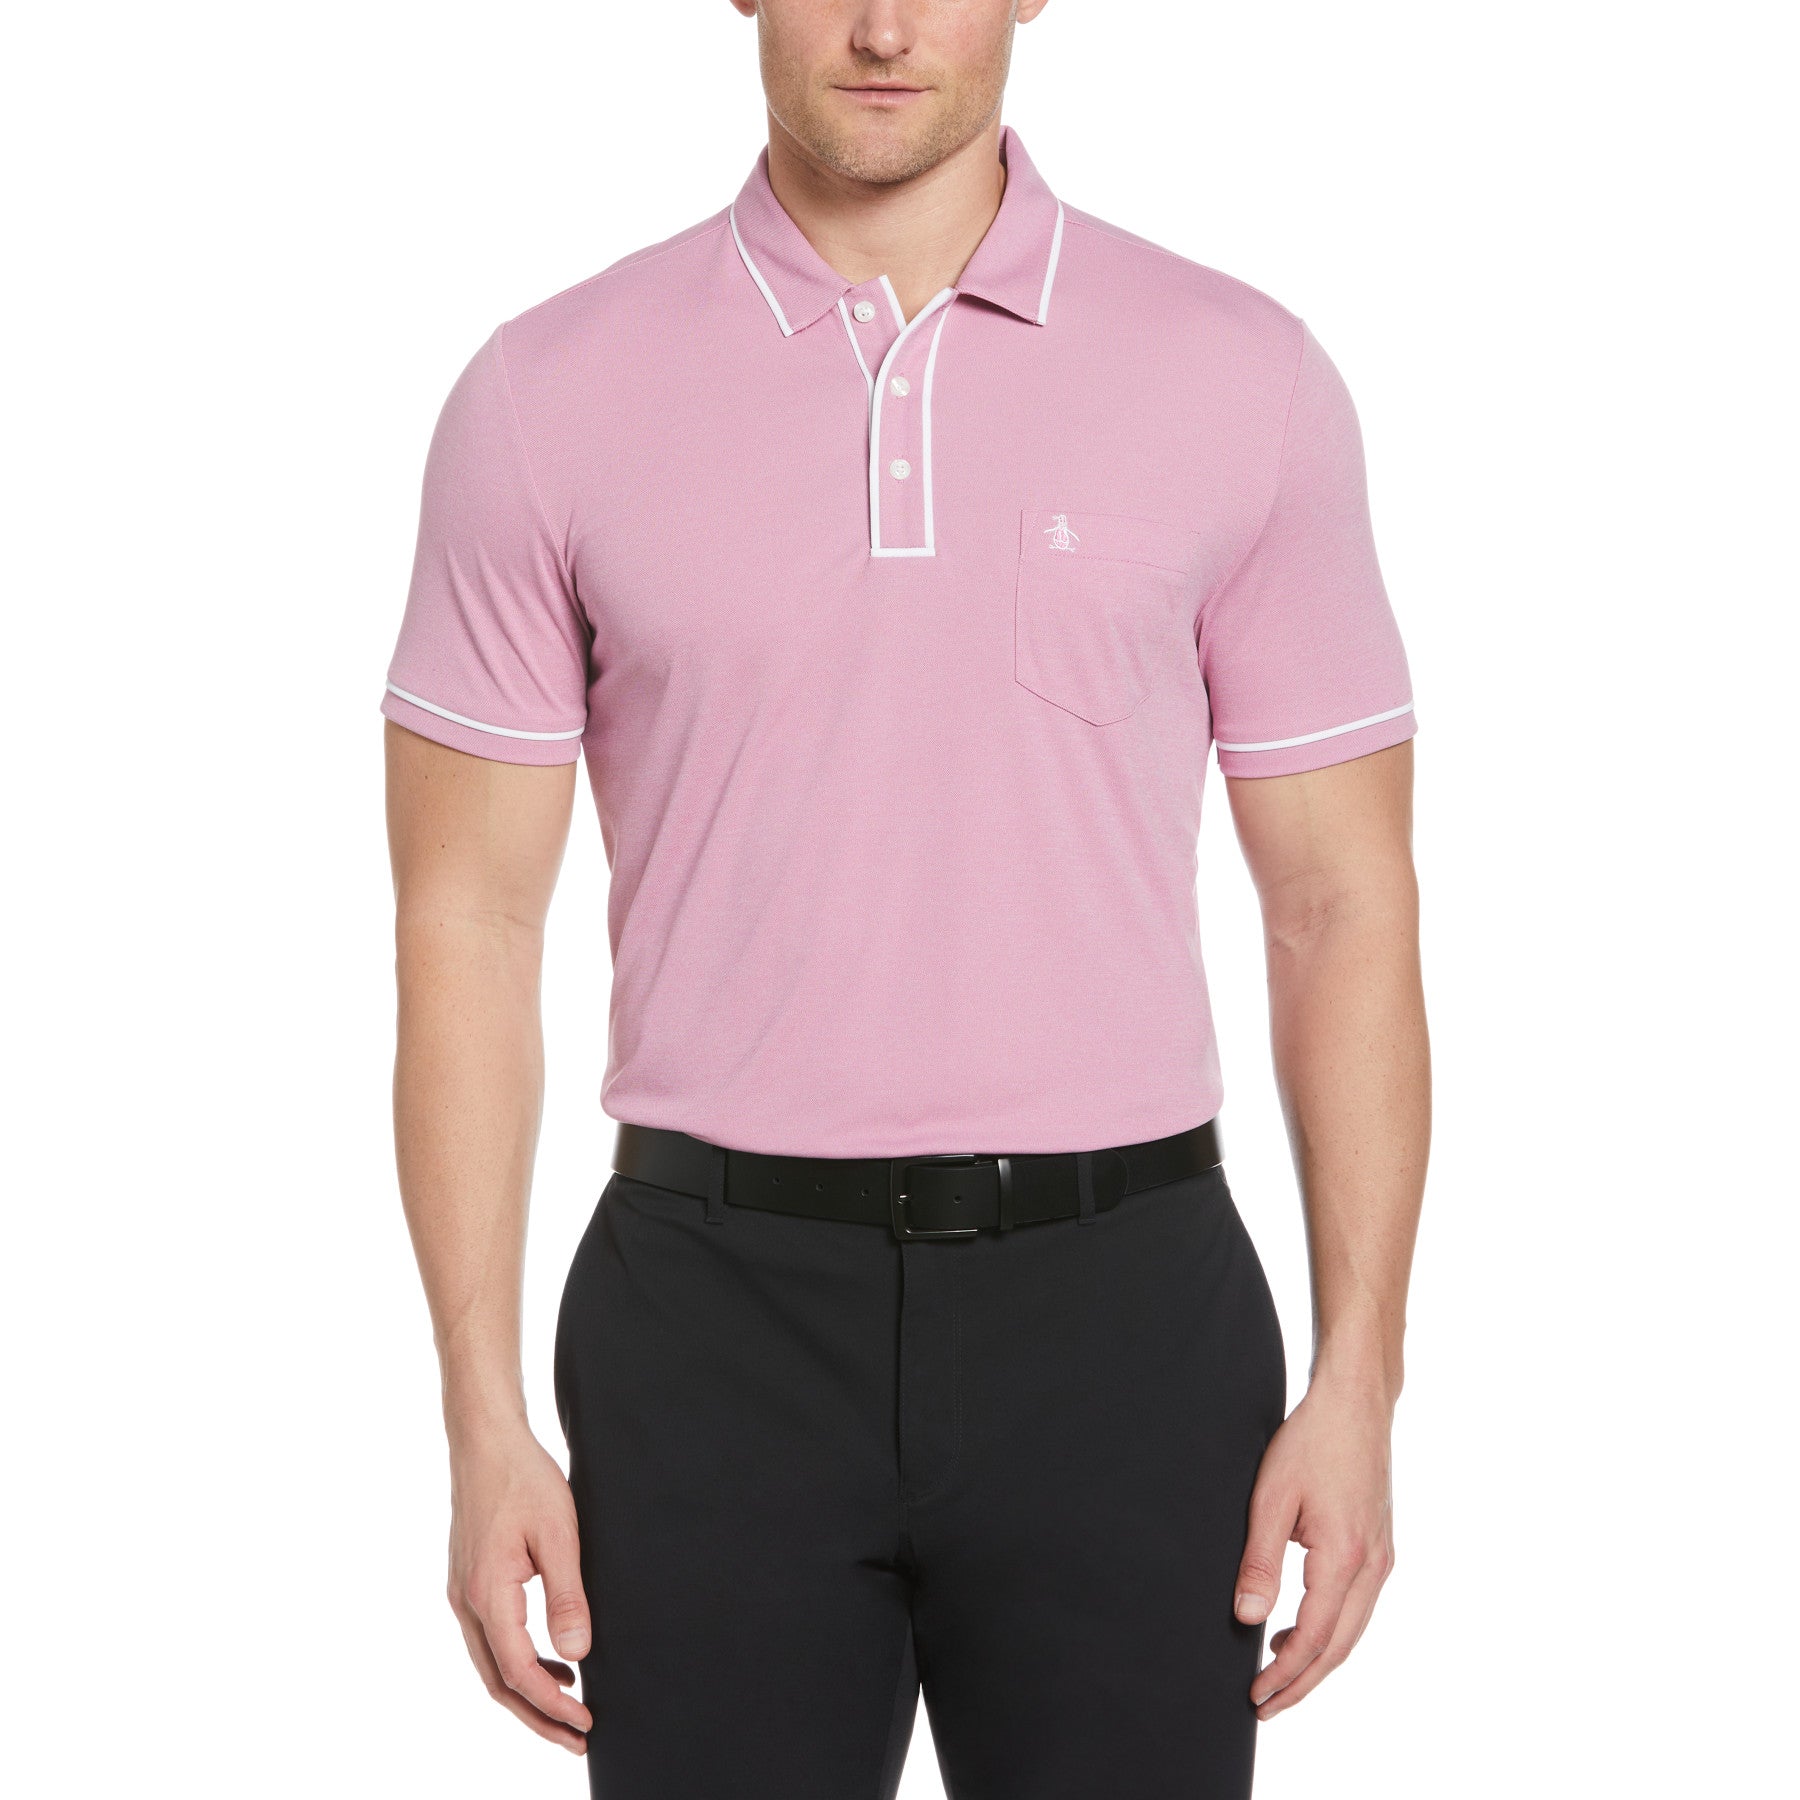 View Eco Performance Earl Golf Polo Shirt In Rose Bouquet information